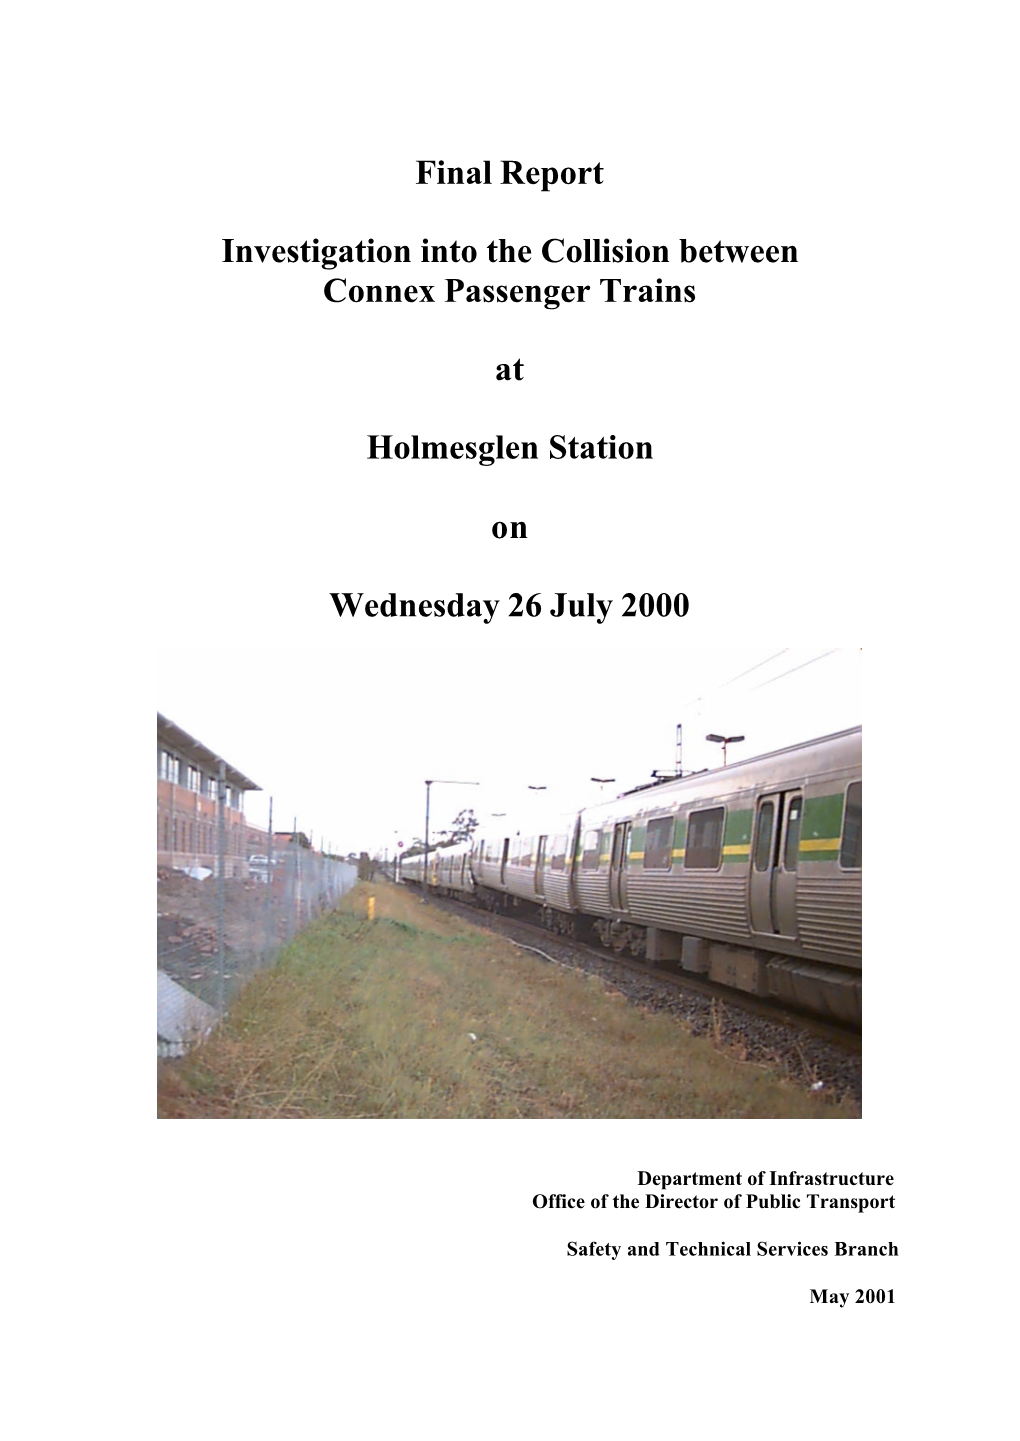 Final Report Investigation Into the Collision Between Connex